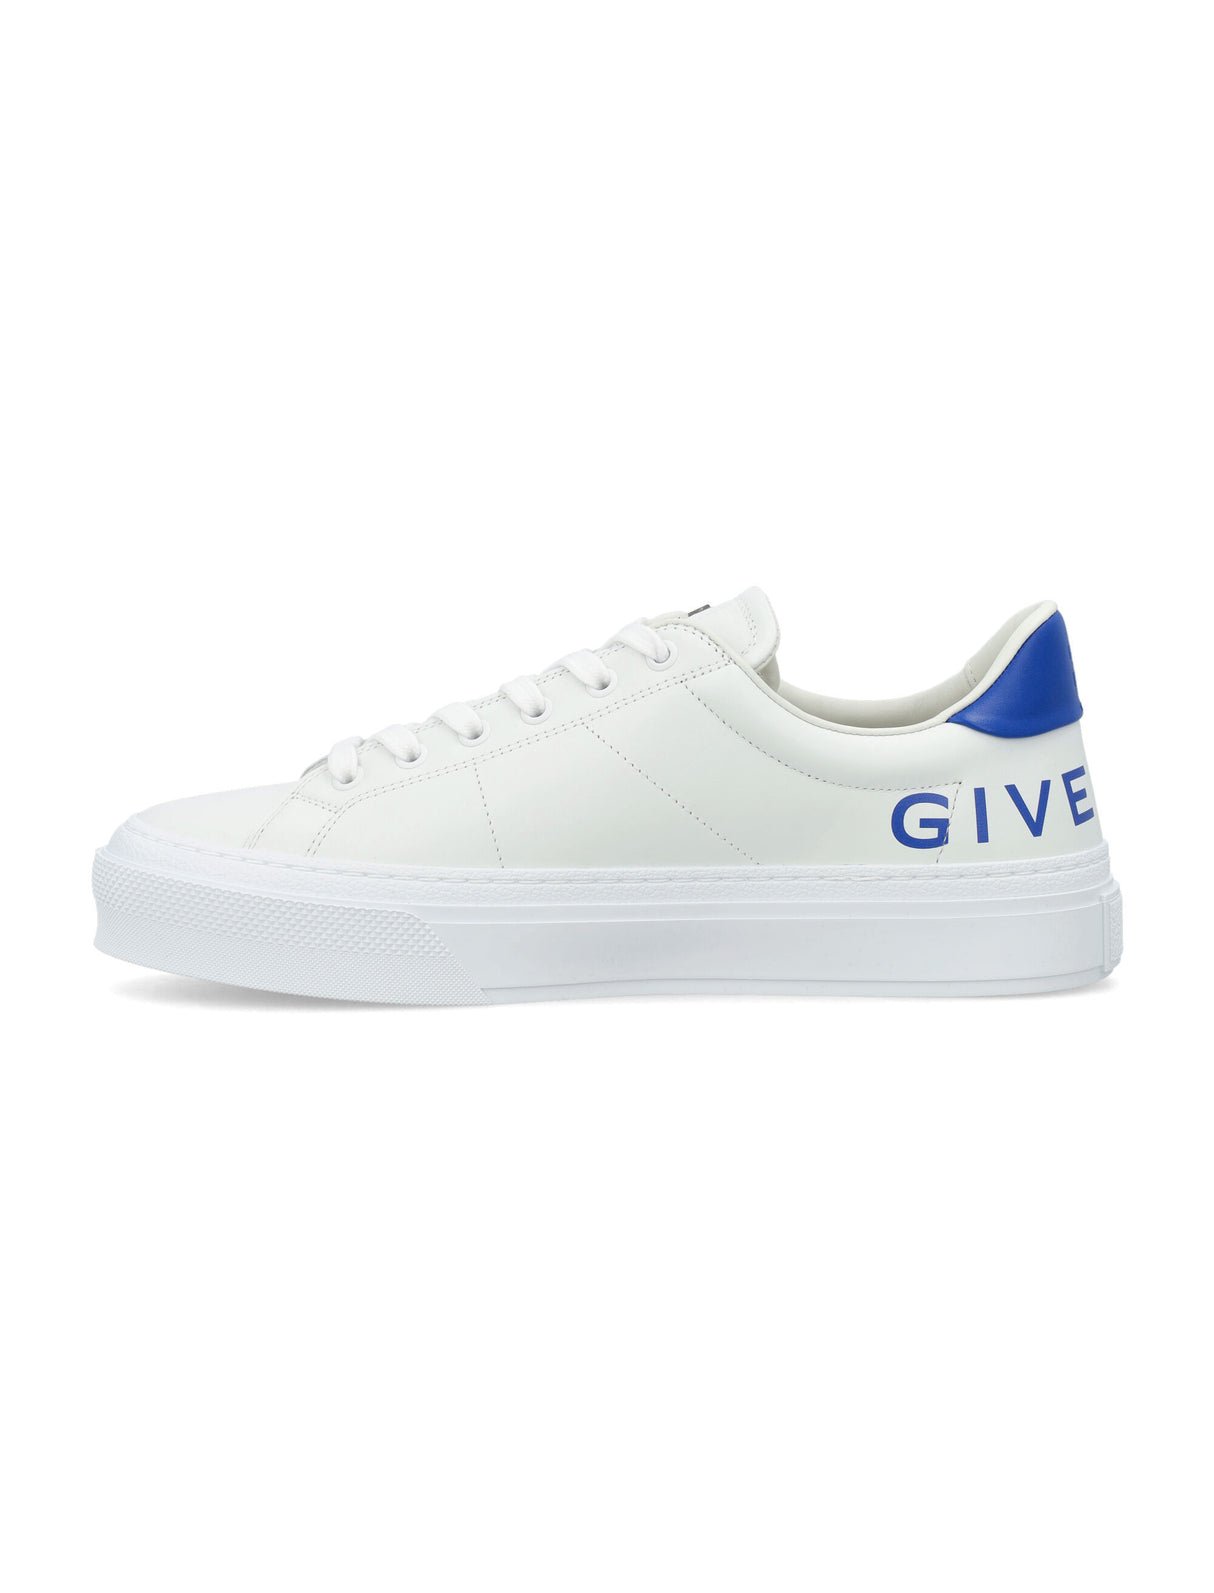 Men's White and Blue Leather Sneakers for SS24 | Low Top, Lace-Up Fastening, GIVENCHY Signature Details